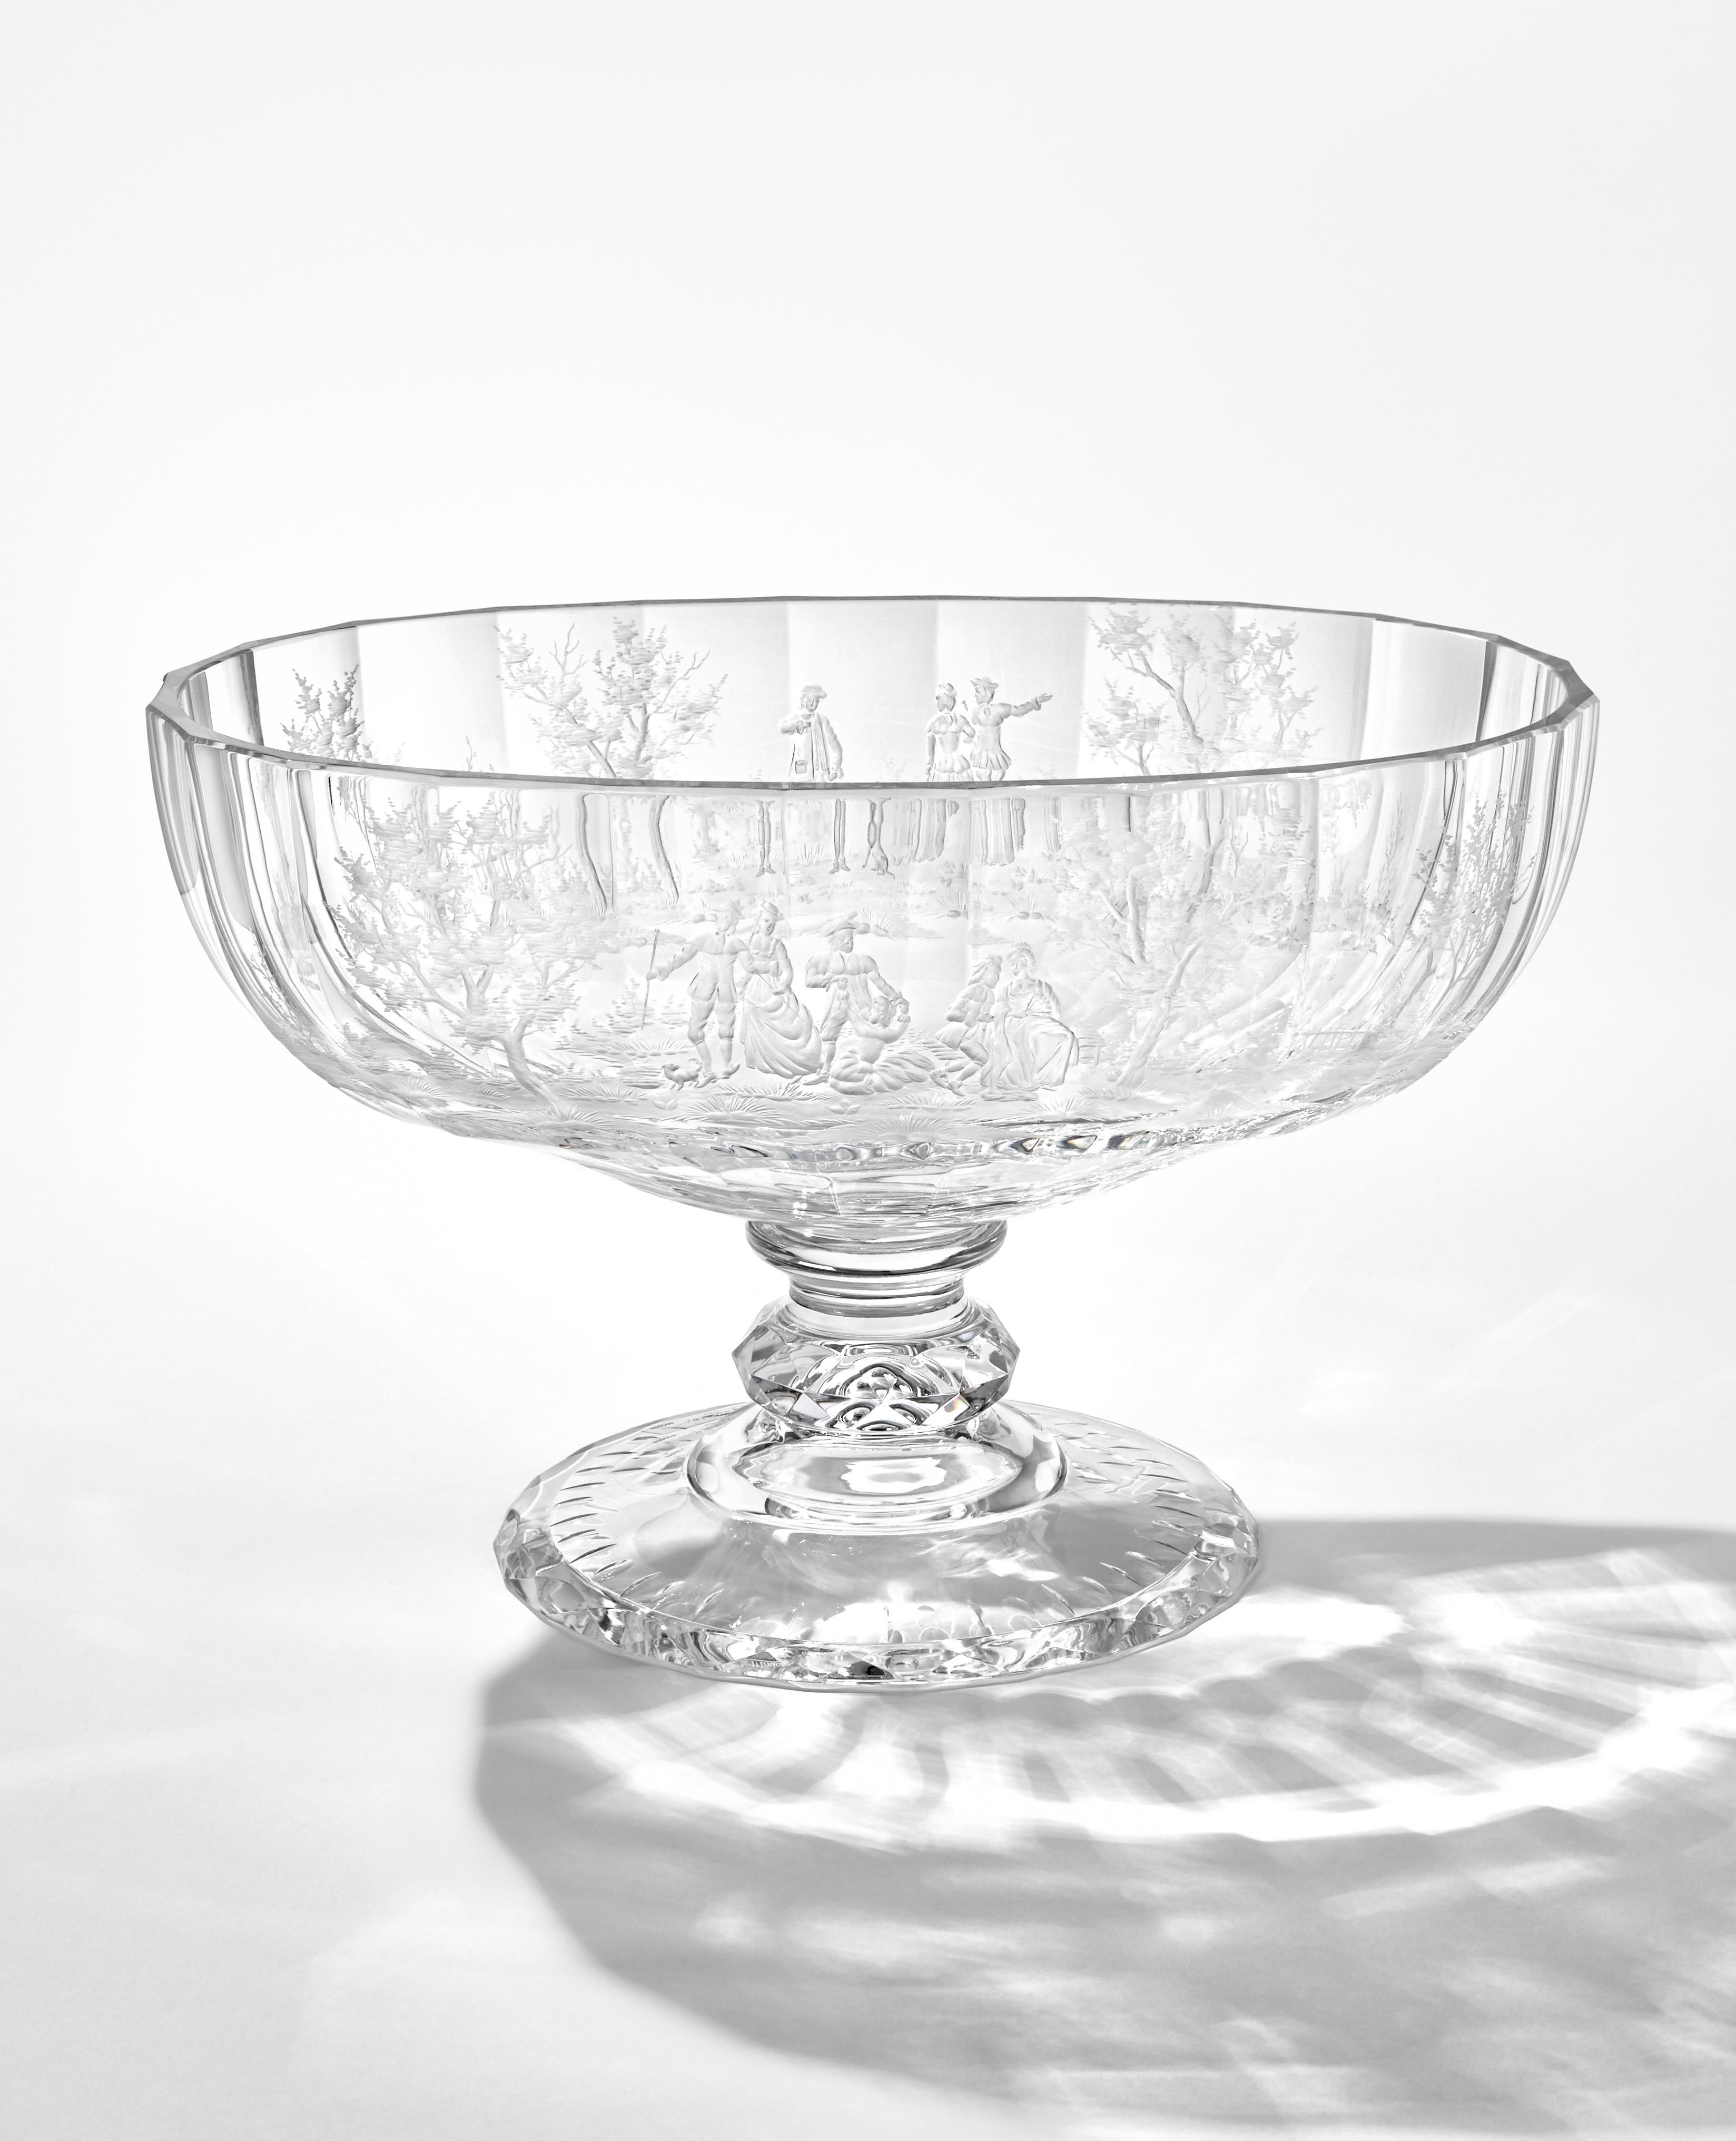 This sumptuous cut and engraved bowl complements the Baroque drinking glass collection Maria Theresa. Like that majestic collection, the Belvedere bowl is an excellent illustration of the abilities of Moser’s engravers. As well as having a wealth of